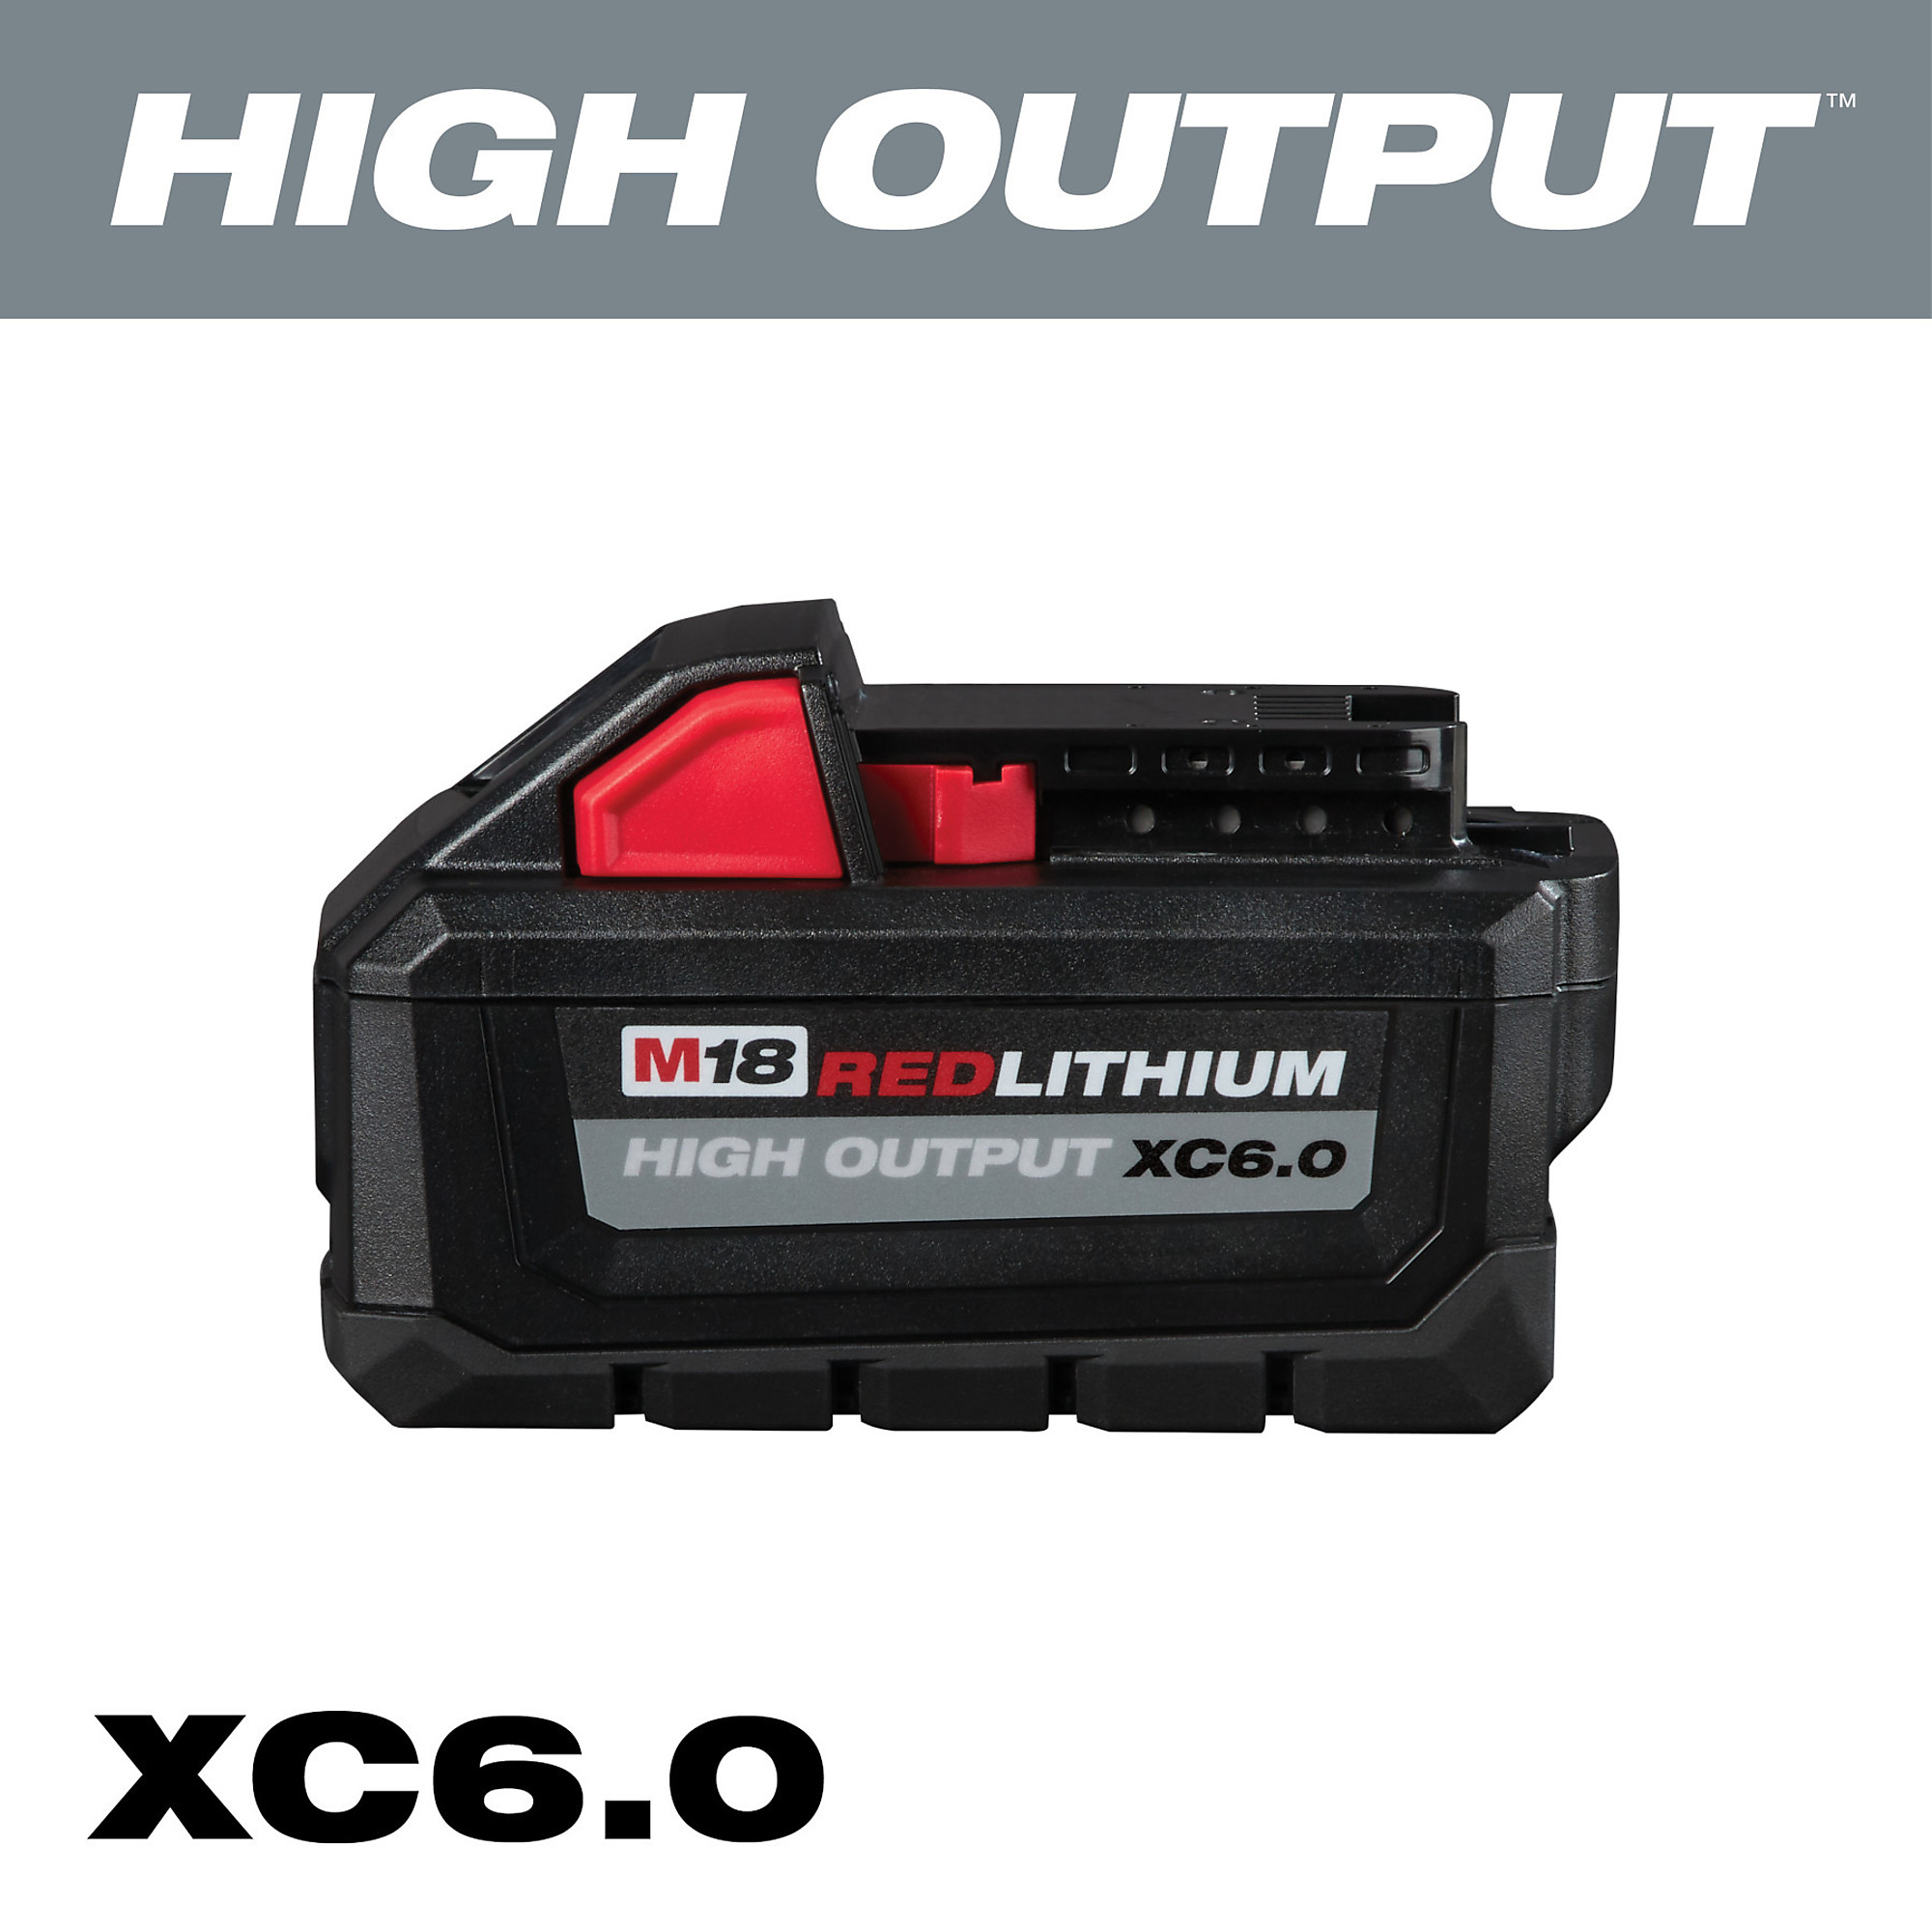 Milwaukee M18 REDLITHIUM High Output XC6.0 Battery Pack, 6.0Ah, Model 48-11-1865